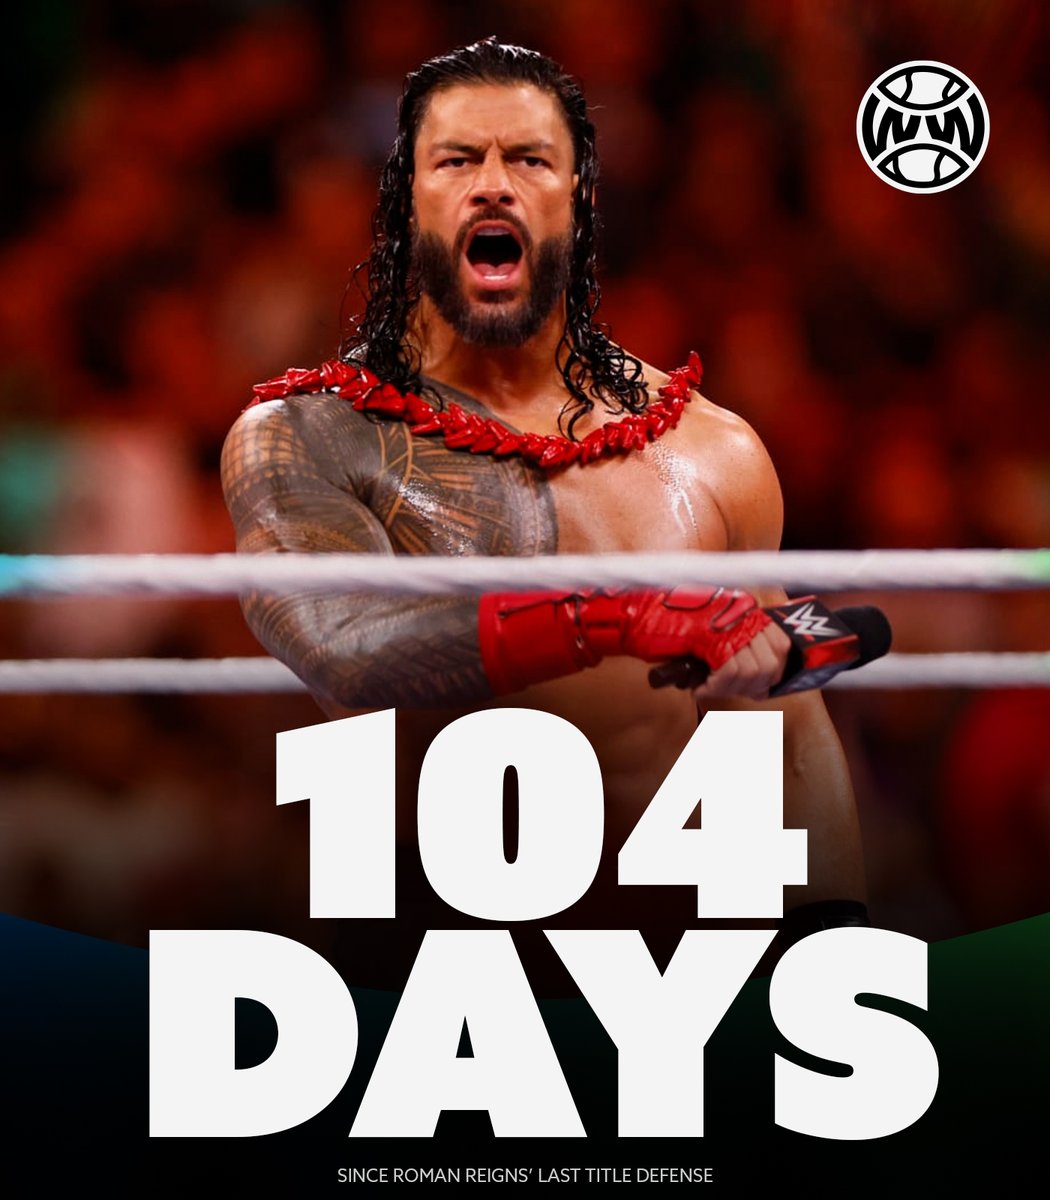 RT @WrestlingWCC: Roman Reigns has surpassed 100 days without a title defense https://t.co/8hberACNI8